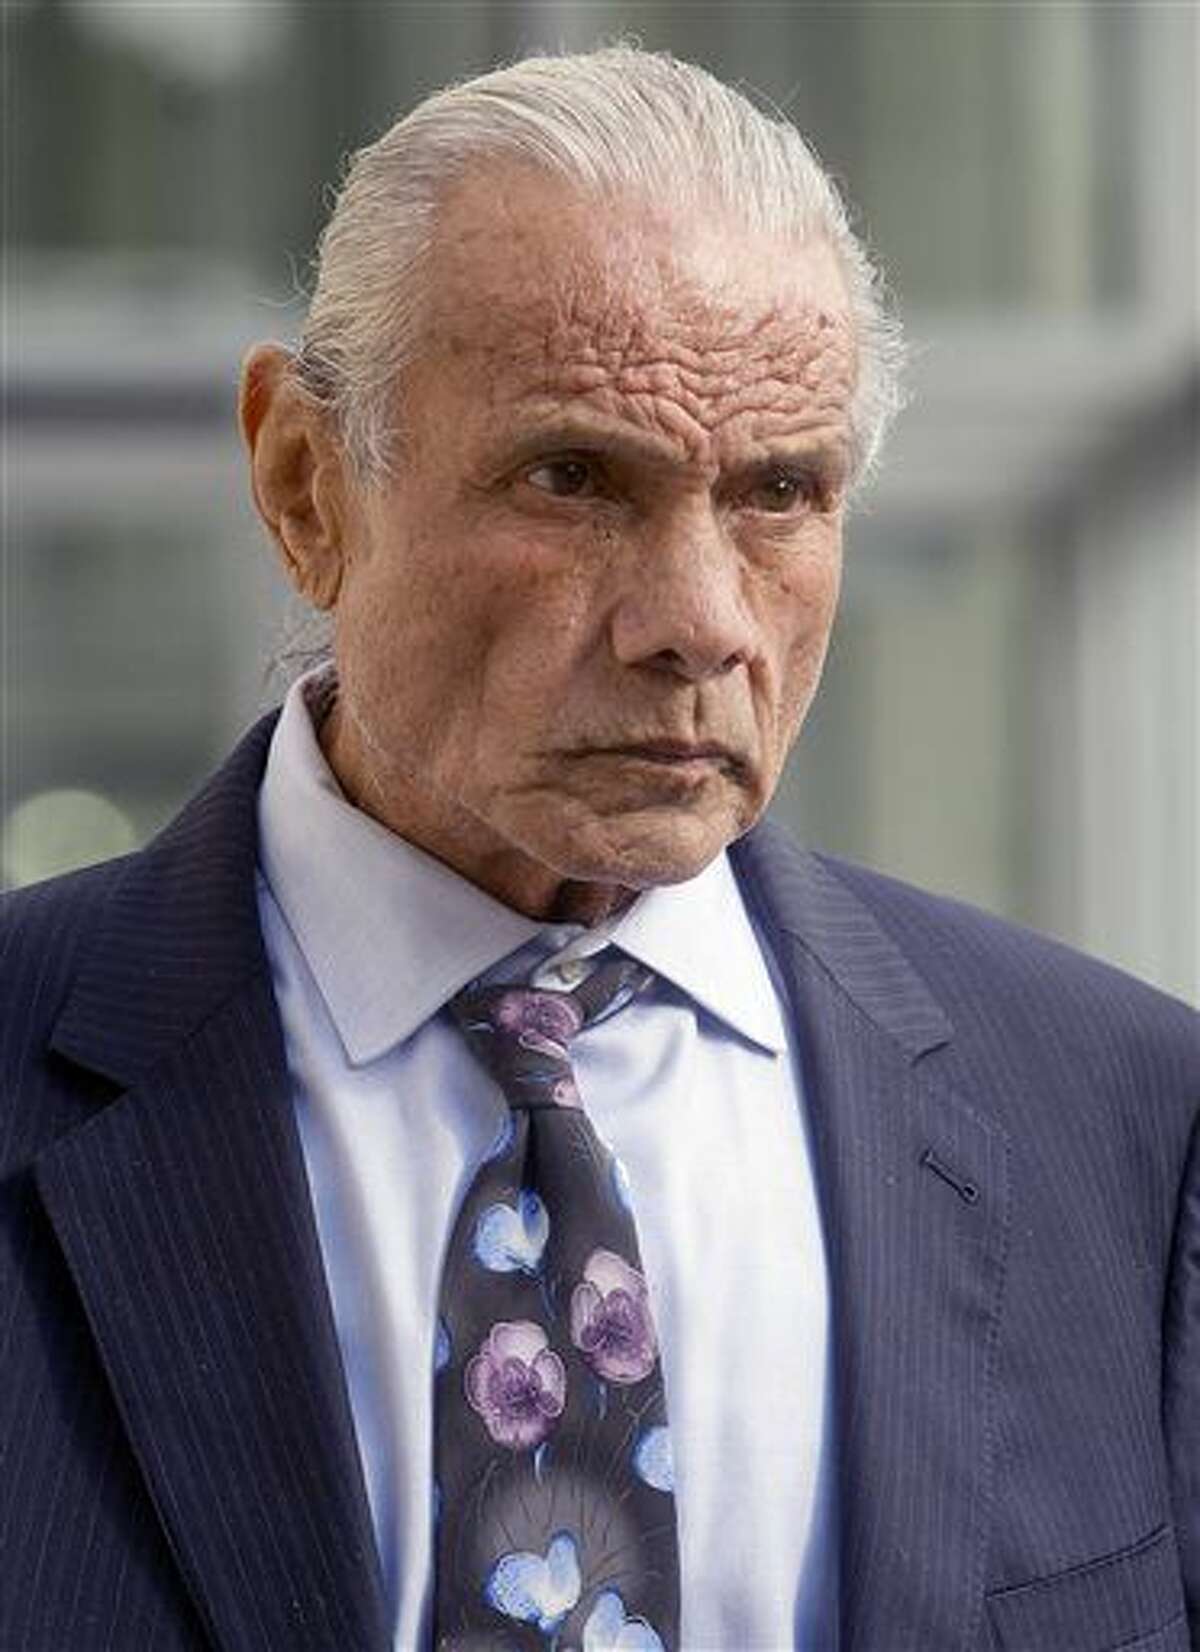 FILE - In this Nov. 2, 2015, file photo, former professional wrestler Jimmy "Superfly" Snuka leaves after his formal arraignment at the Lehigh County Courthouse in Allentown, Pa. A prosecution expert is scheduled to testify Wednesday, May 18, 2016, on the second day of a competency hearing for Snuka, who is charged in the death of his girlfriend in Pennsylvania more than three decades ago. Snuka, who turns 73 on Wednesday, is fighting to avoid trial on murder and involuntary manslaughter charges. He’s accused in the death of Nancy Argentino, (Michael Kubel/The Morning Call via AP, File) THE EXPRESS-TIMES OUT; WFMZ OUT; MANDATORY CREDIT